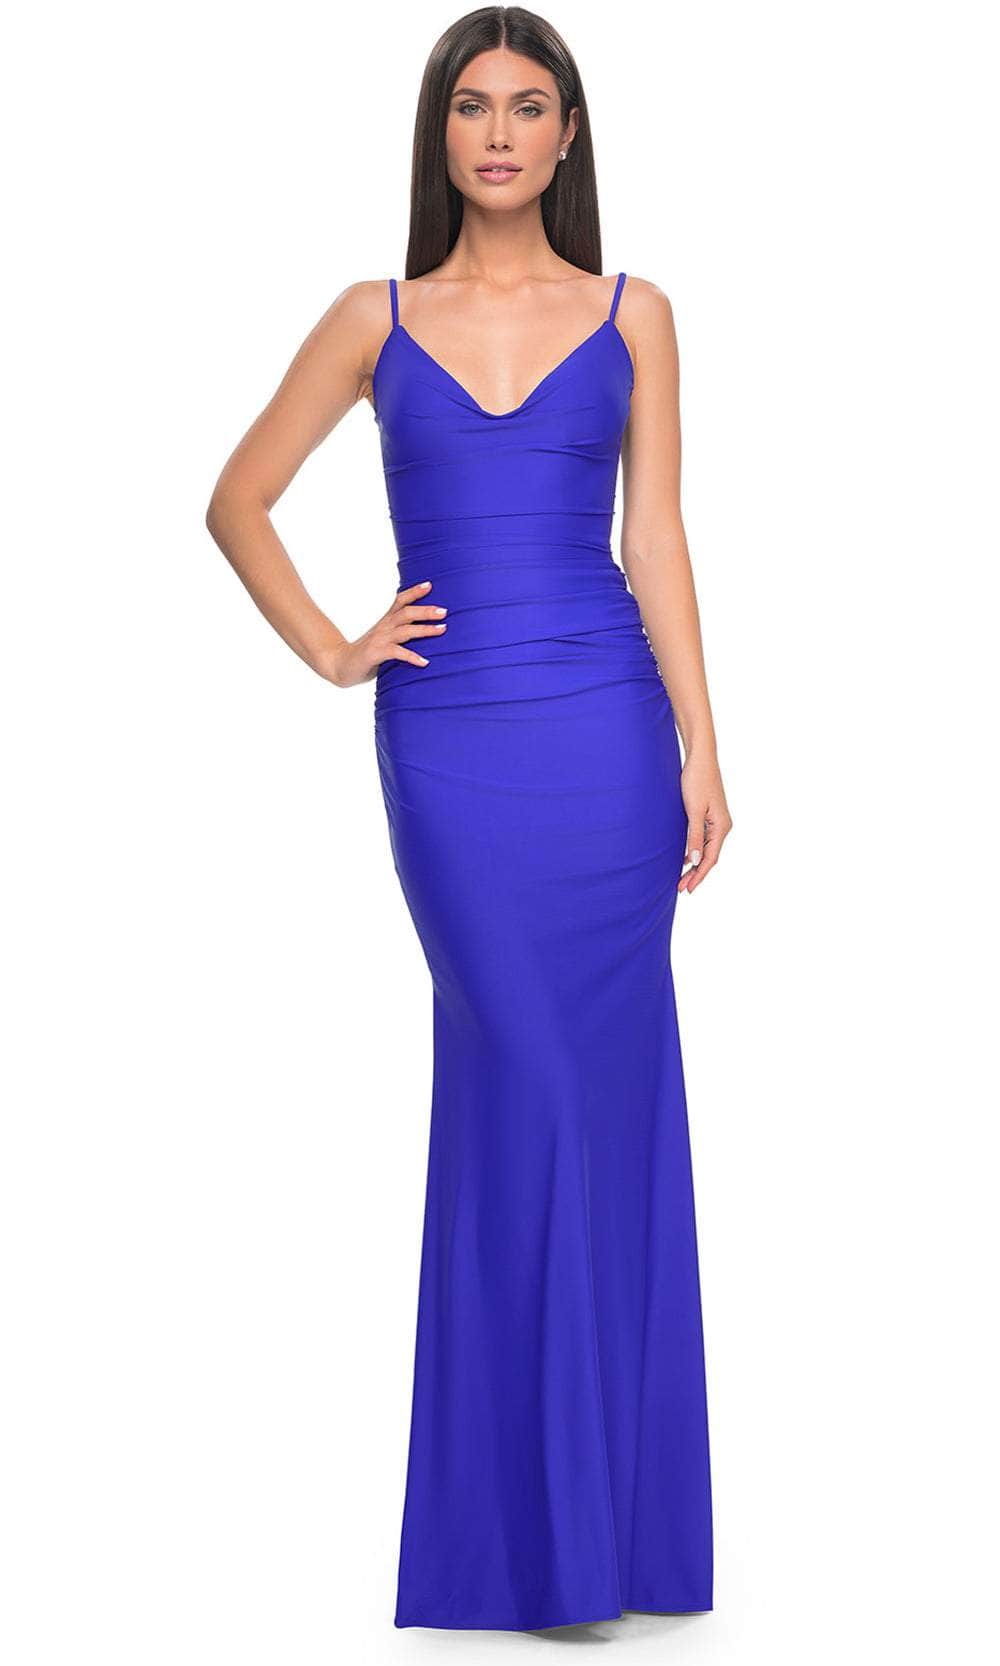 La Femme 32153 - Fitted Jersey Prom Dress Special Occasion Dress 00 / Royal Blue